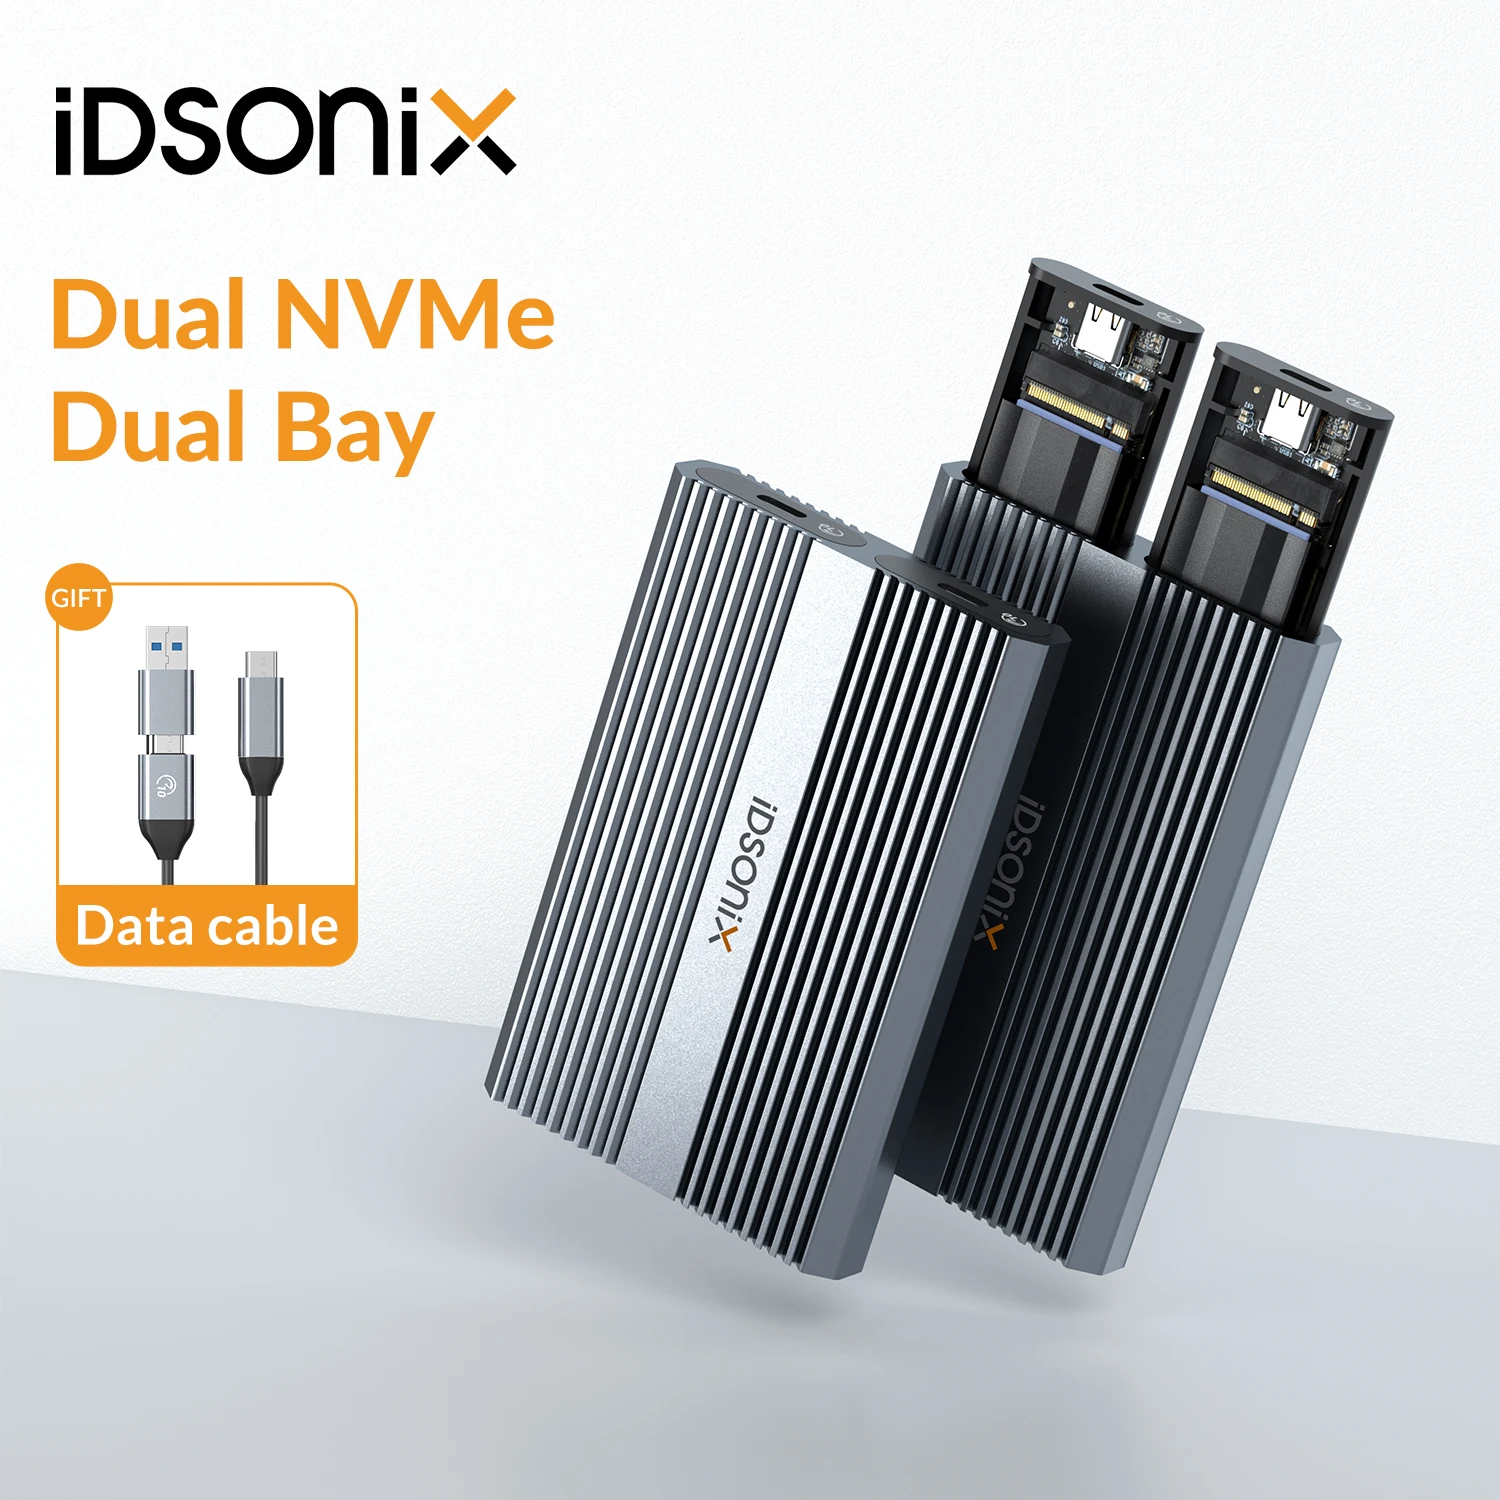 

iDsonix M.2 SSD Case Nvme Enclosure Dual Portocol NVMe To USB Adapter NGFF External Case Type C 10Gbps HD Storage Box For Mac